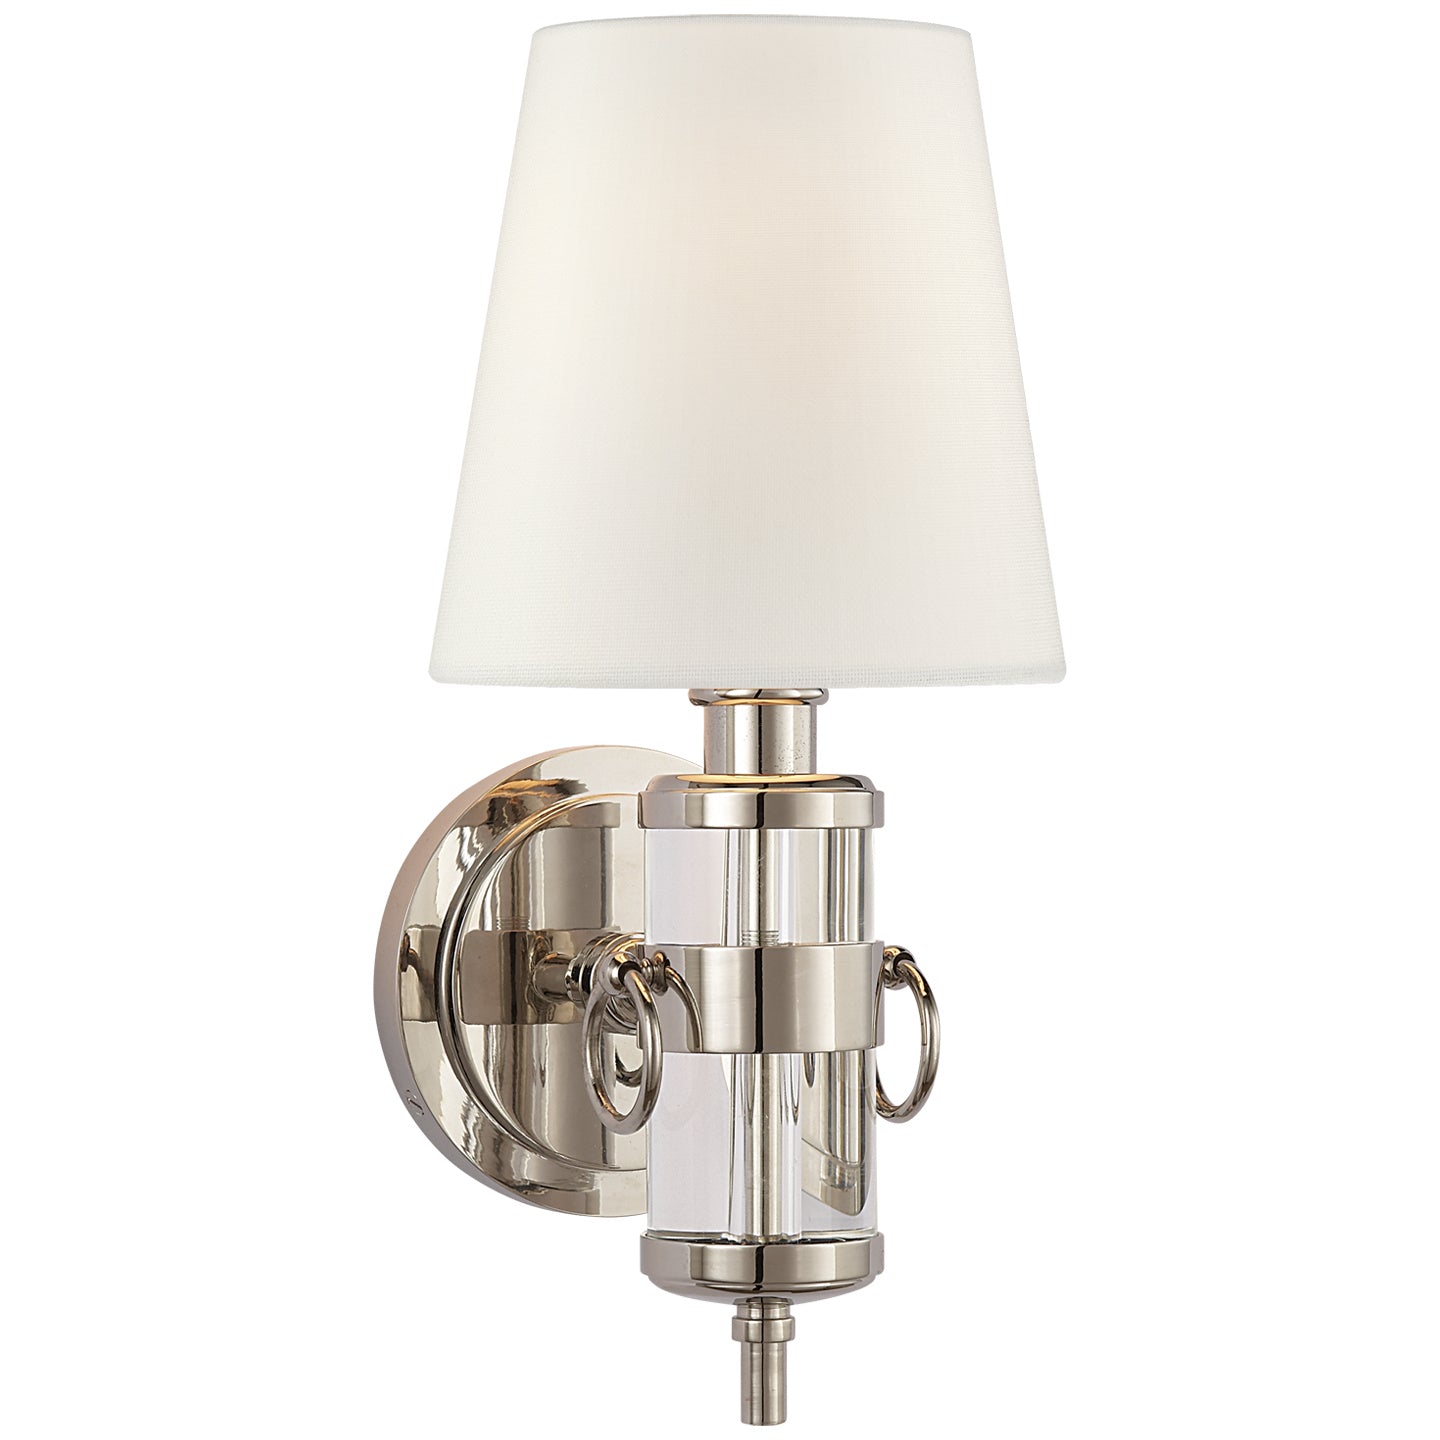 Load image into Gallery viewer, Visual Comfort Signature - TOB 2730CG-L - One Light Wall Sconce - Jonathan - Crystal
